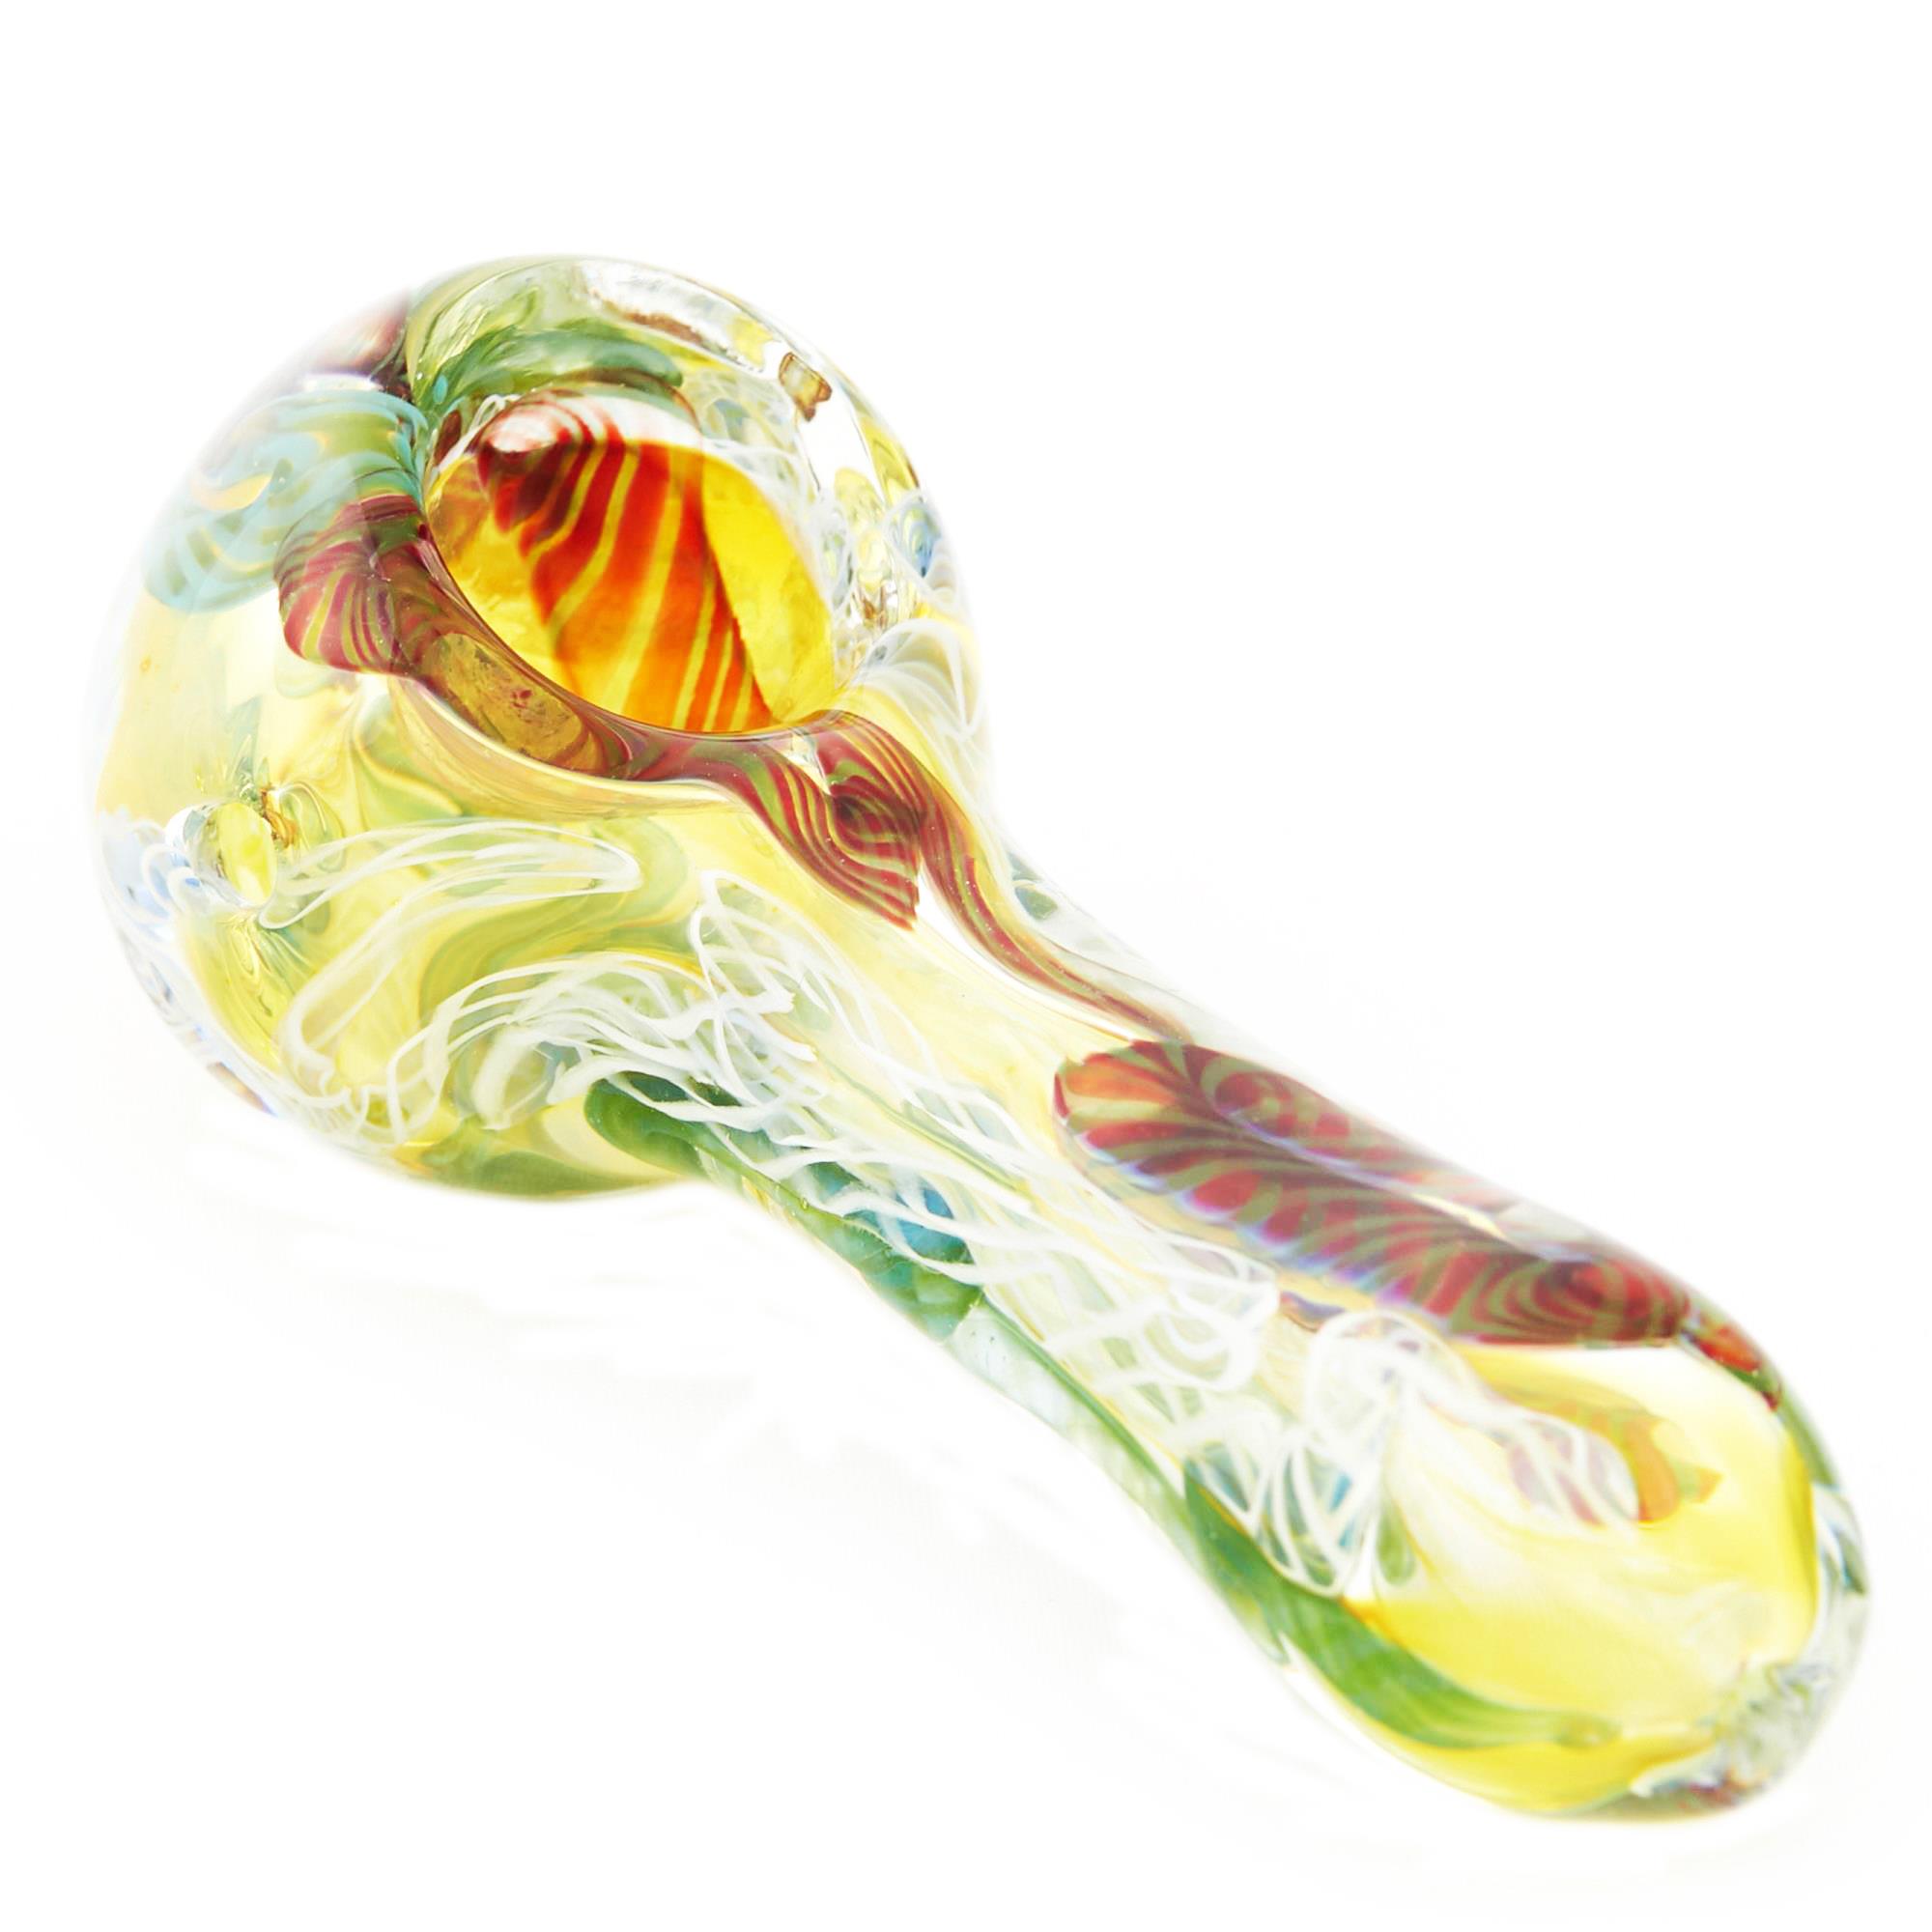 FREE YOUR MIND SPOON PIPE